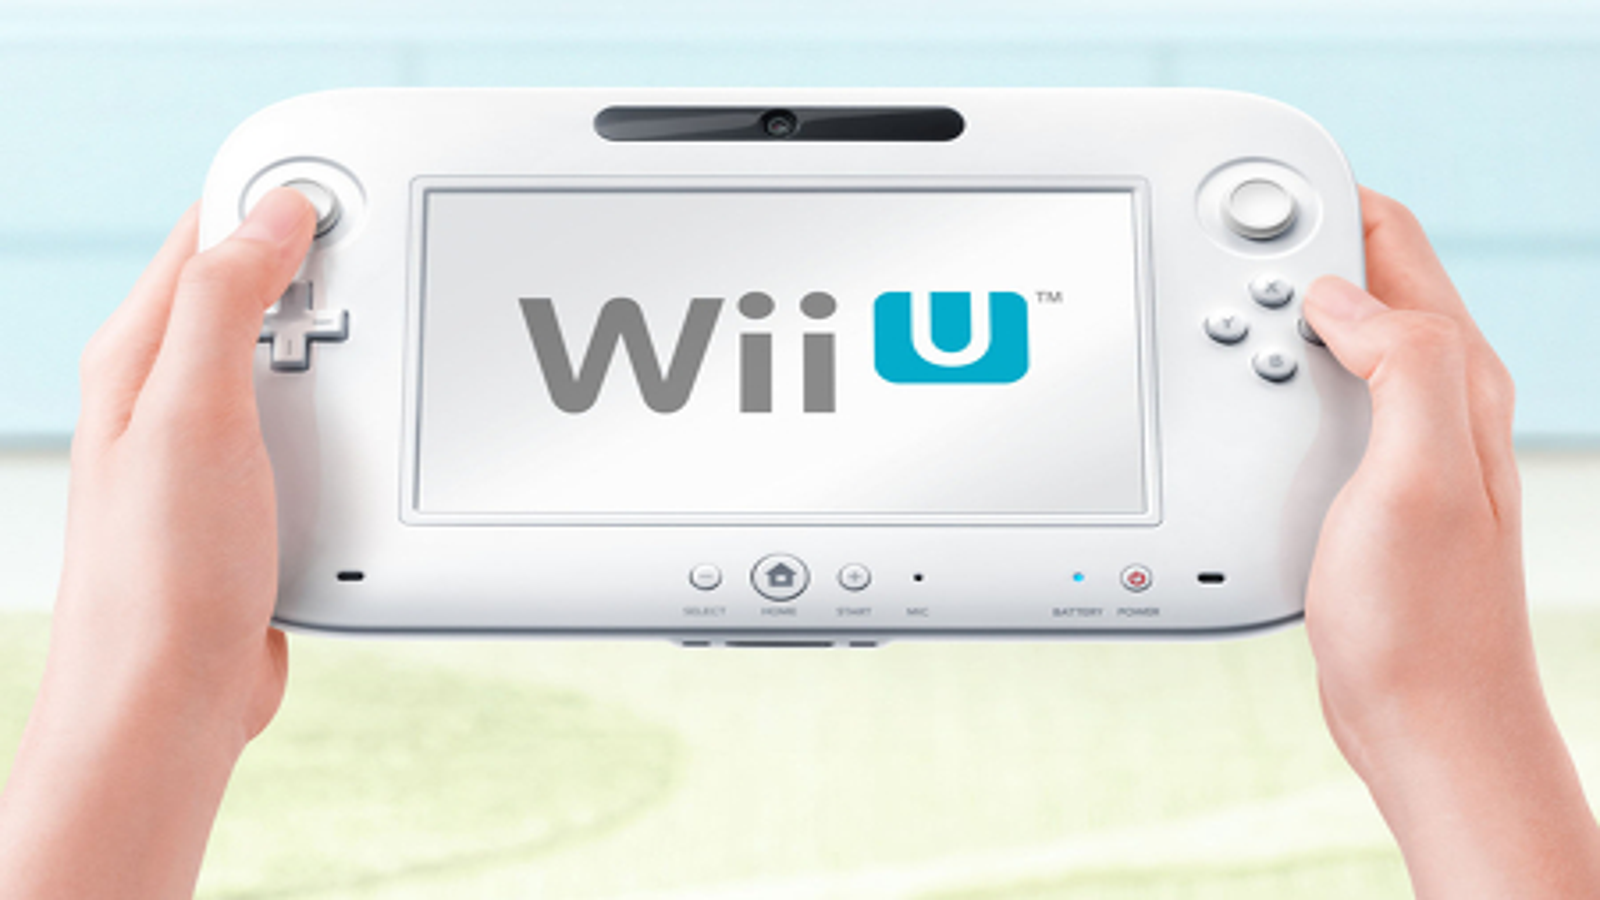 Wii U Remote Plus (Style May Vary)